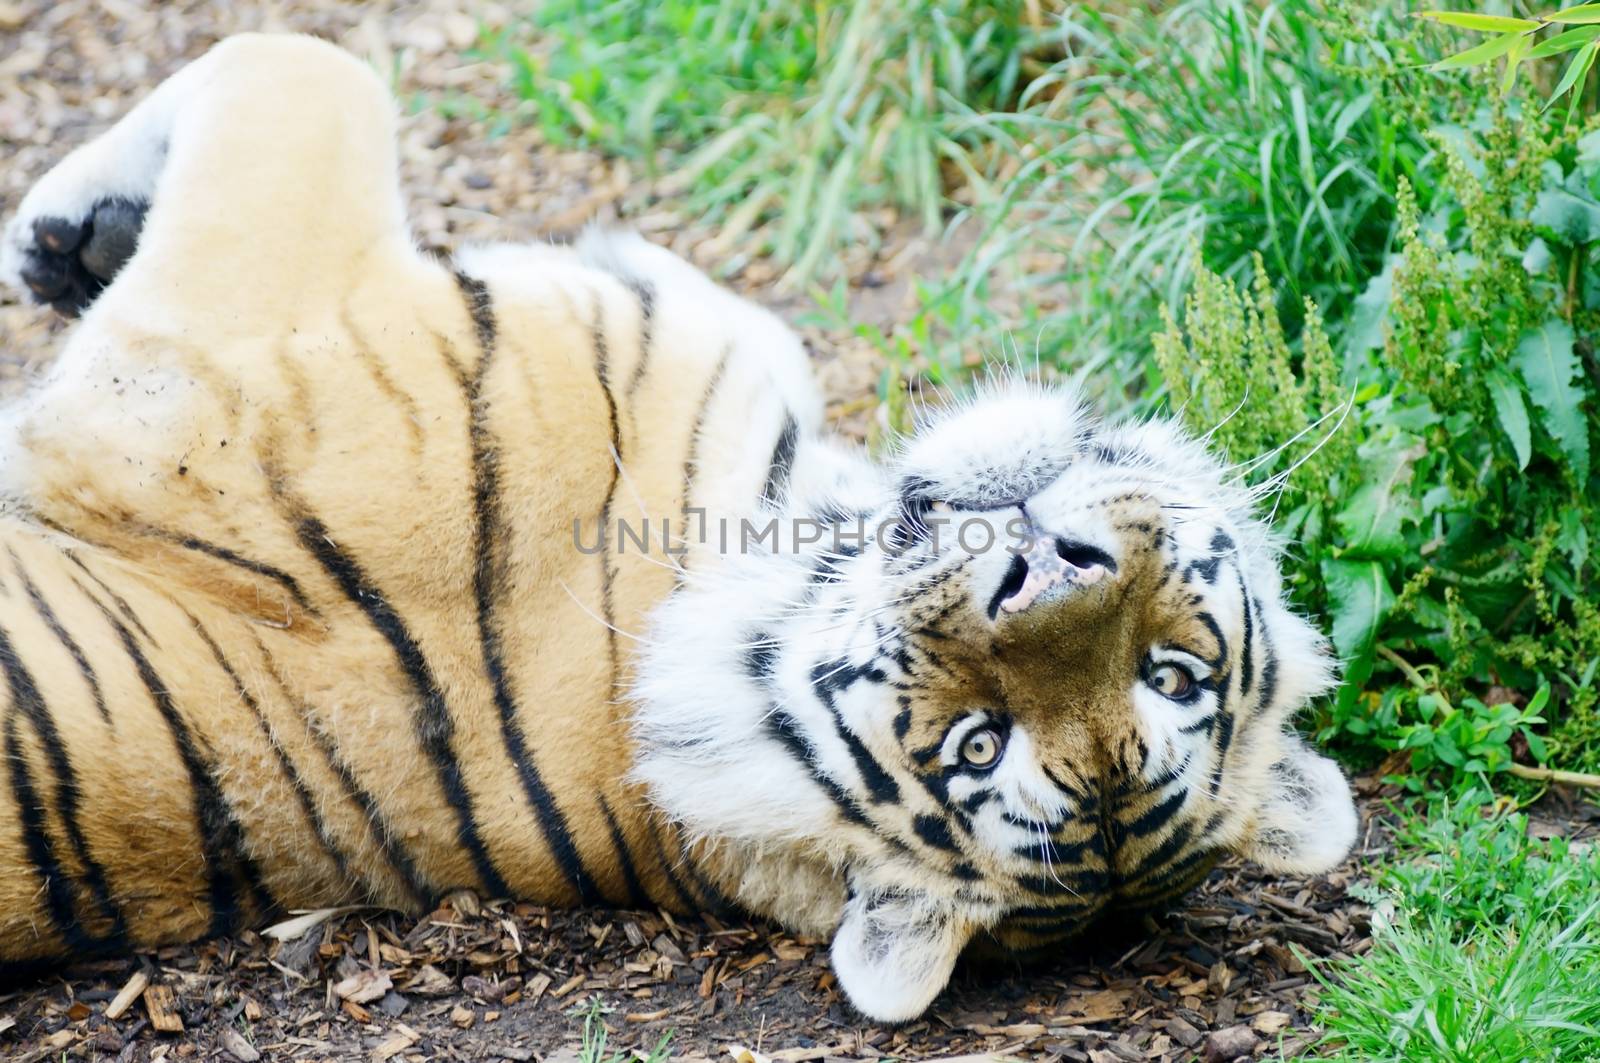 Tiger playful by kmwphotography